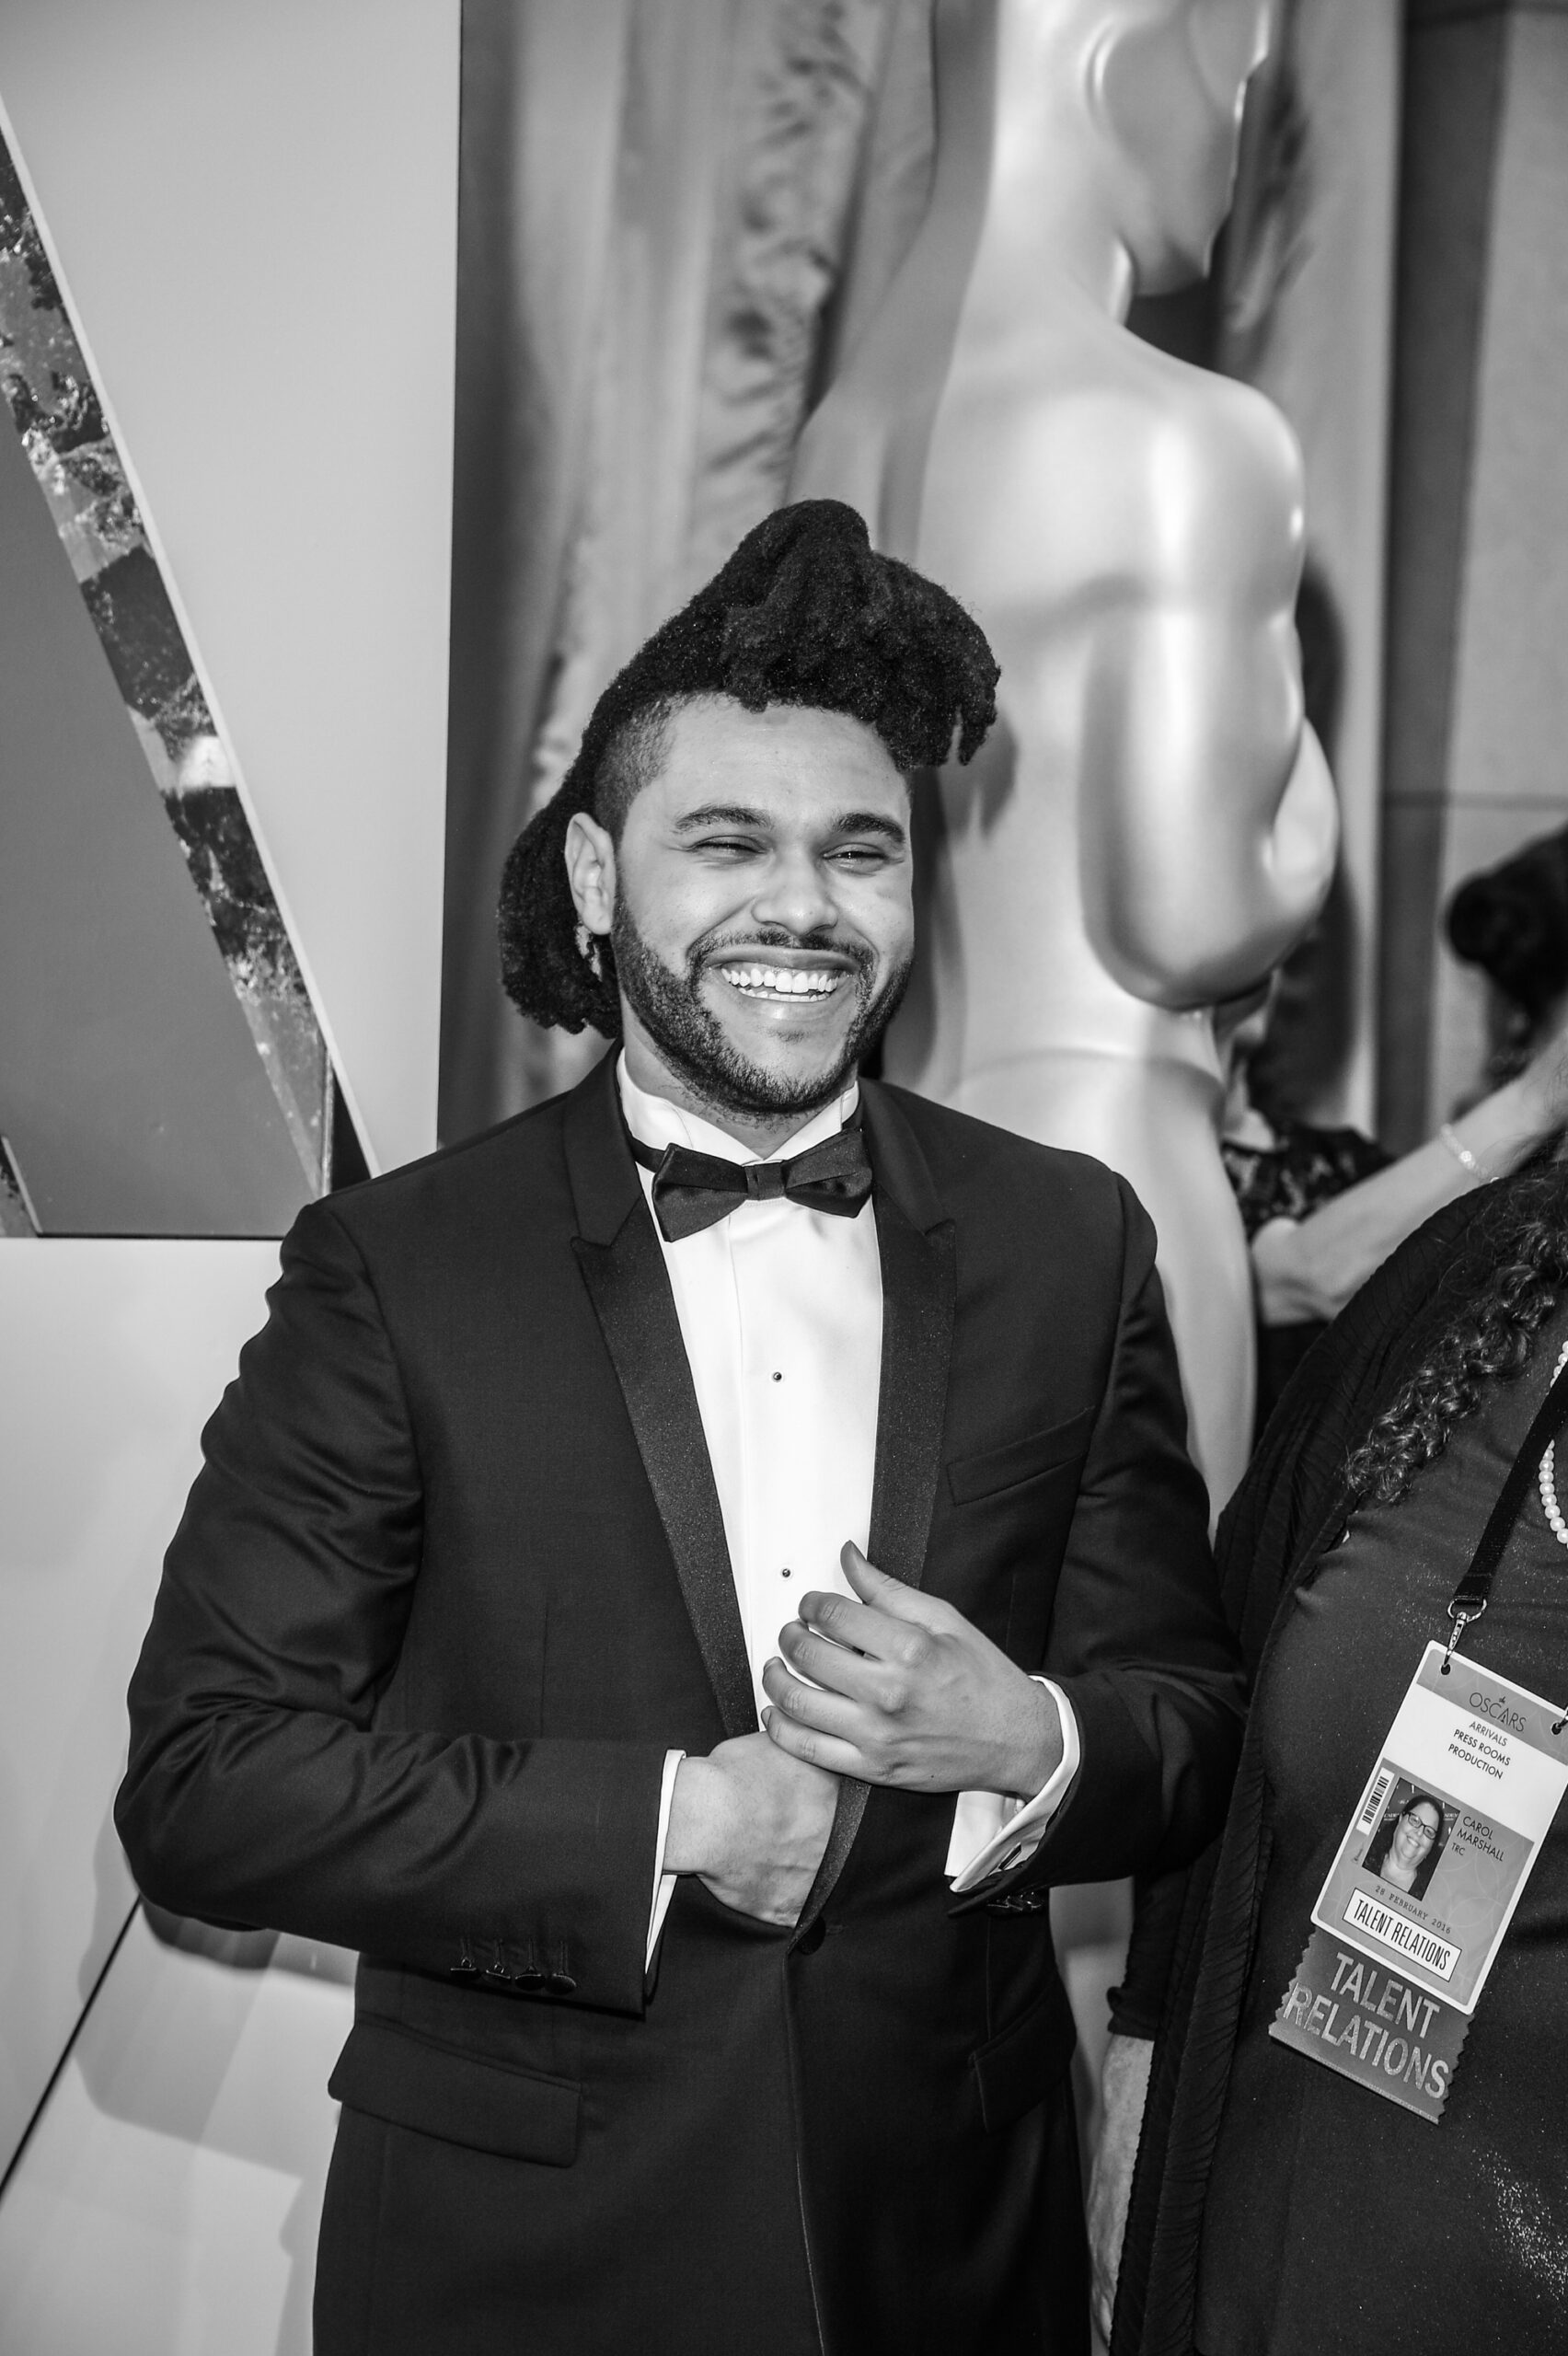 The Weeknd, in a black tuxedo, photographed by George Pimentel, black and white image.